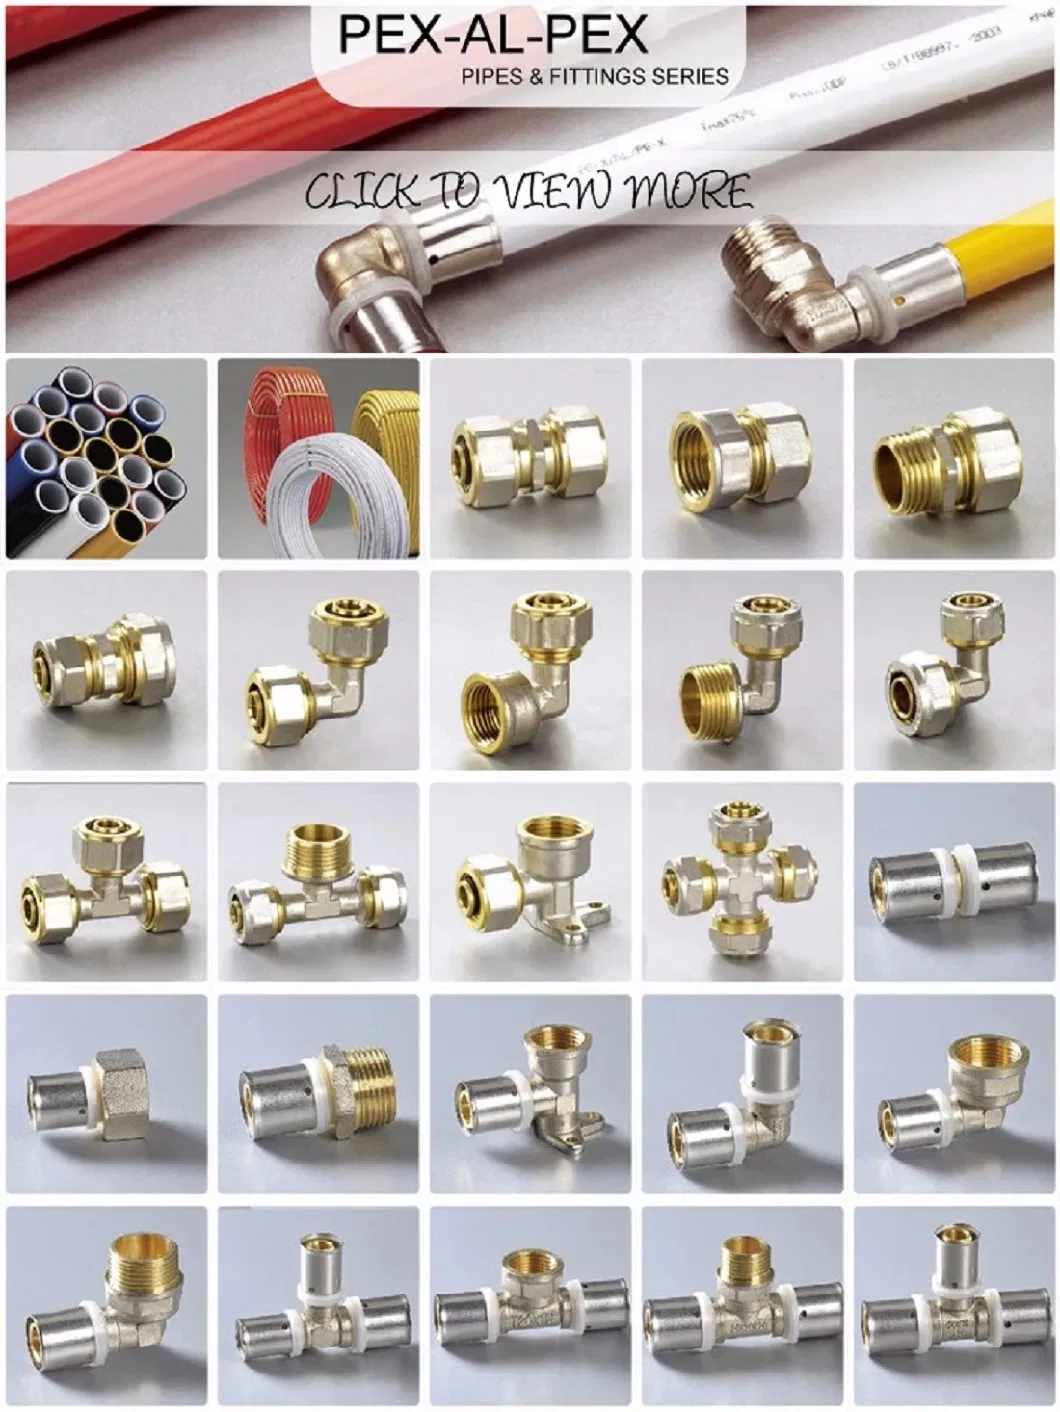 High Quality Female Elbow Tee Bush Sanitary Fitting Pex-Al-Pex Compression Fitting Plumbing Fitting Accesories Tube Fitting Adapter with Professional Services